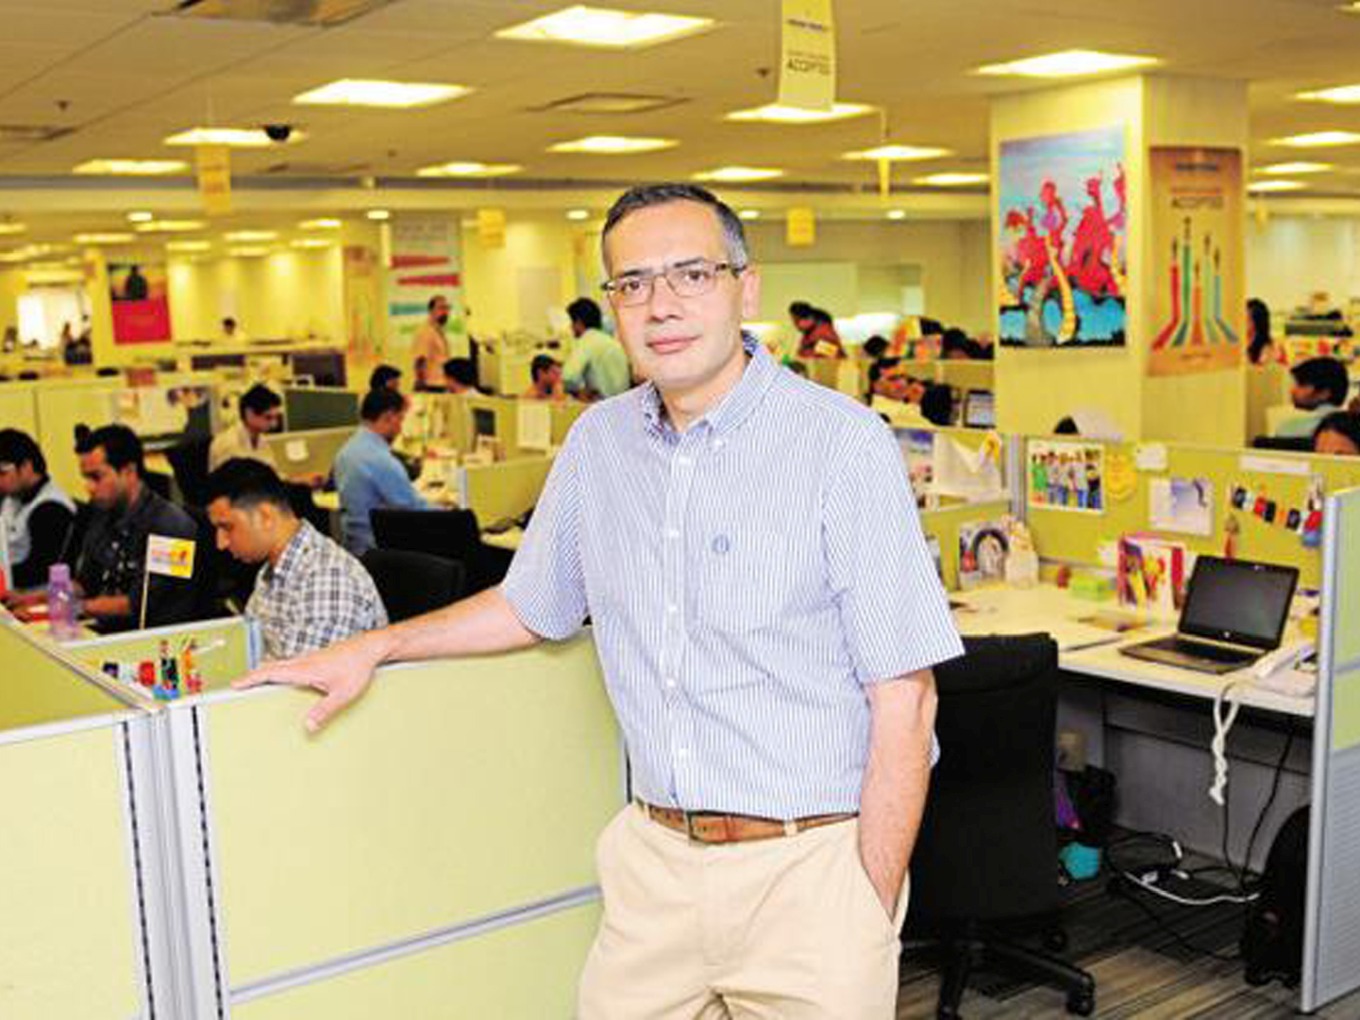 Deep Kalra Steps Down As MakeMyTrip CEO; Rajesh Magow Takes Over